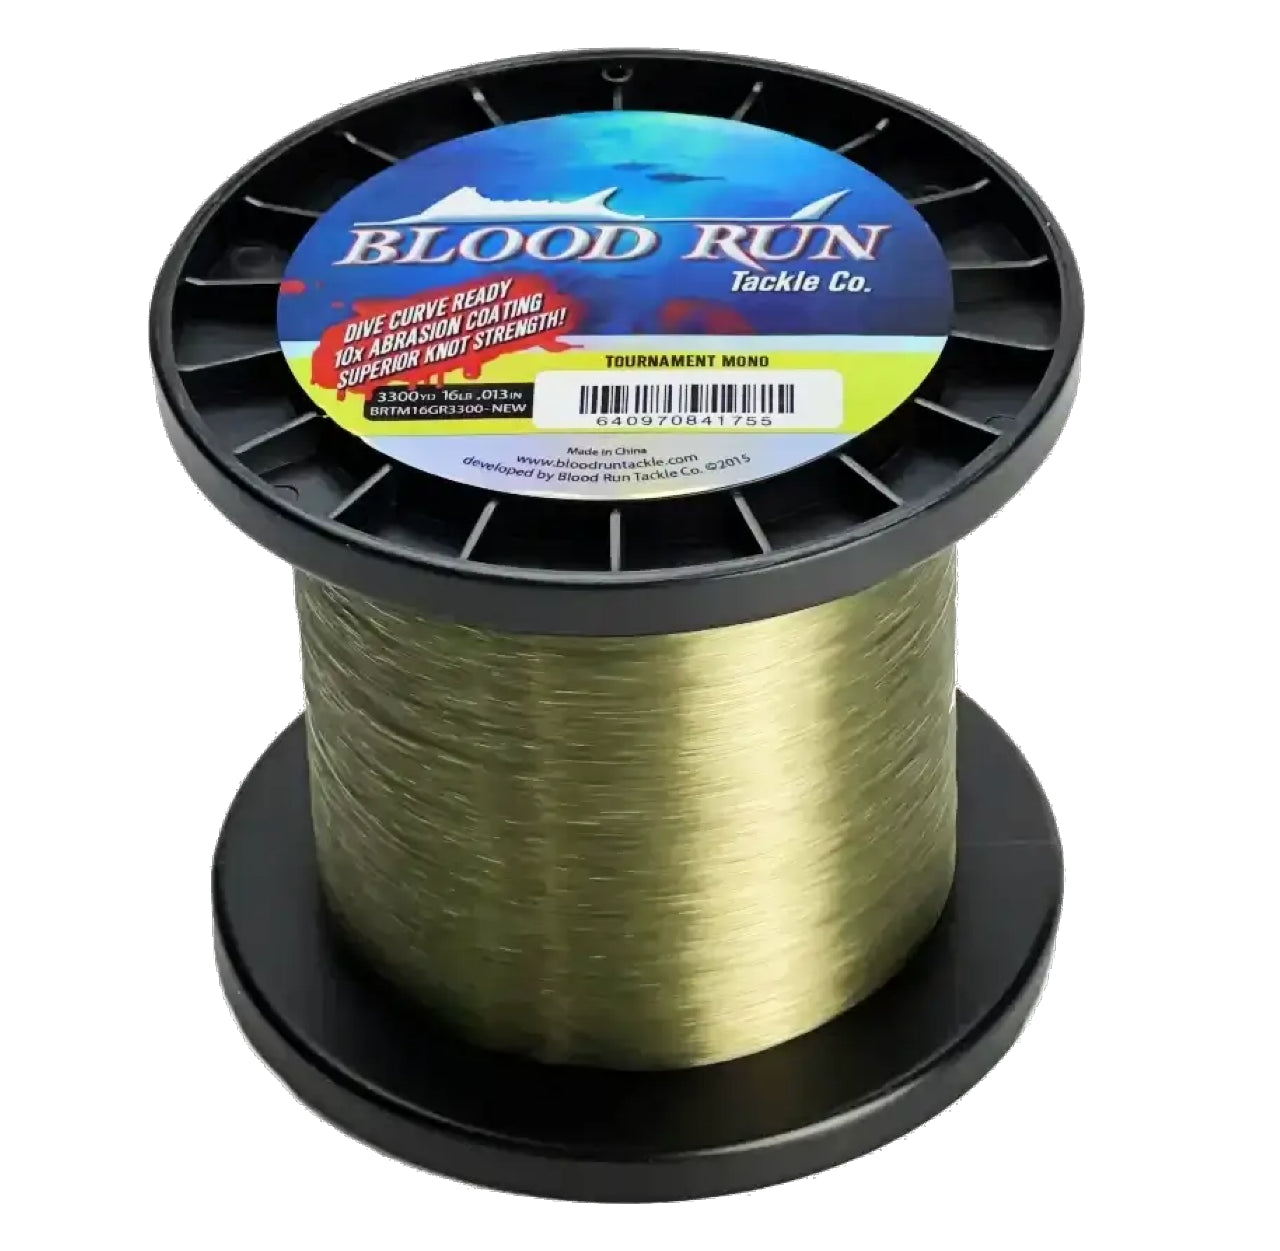 16LB Test Tournament Mono Fishing Line for Walleye and Bass